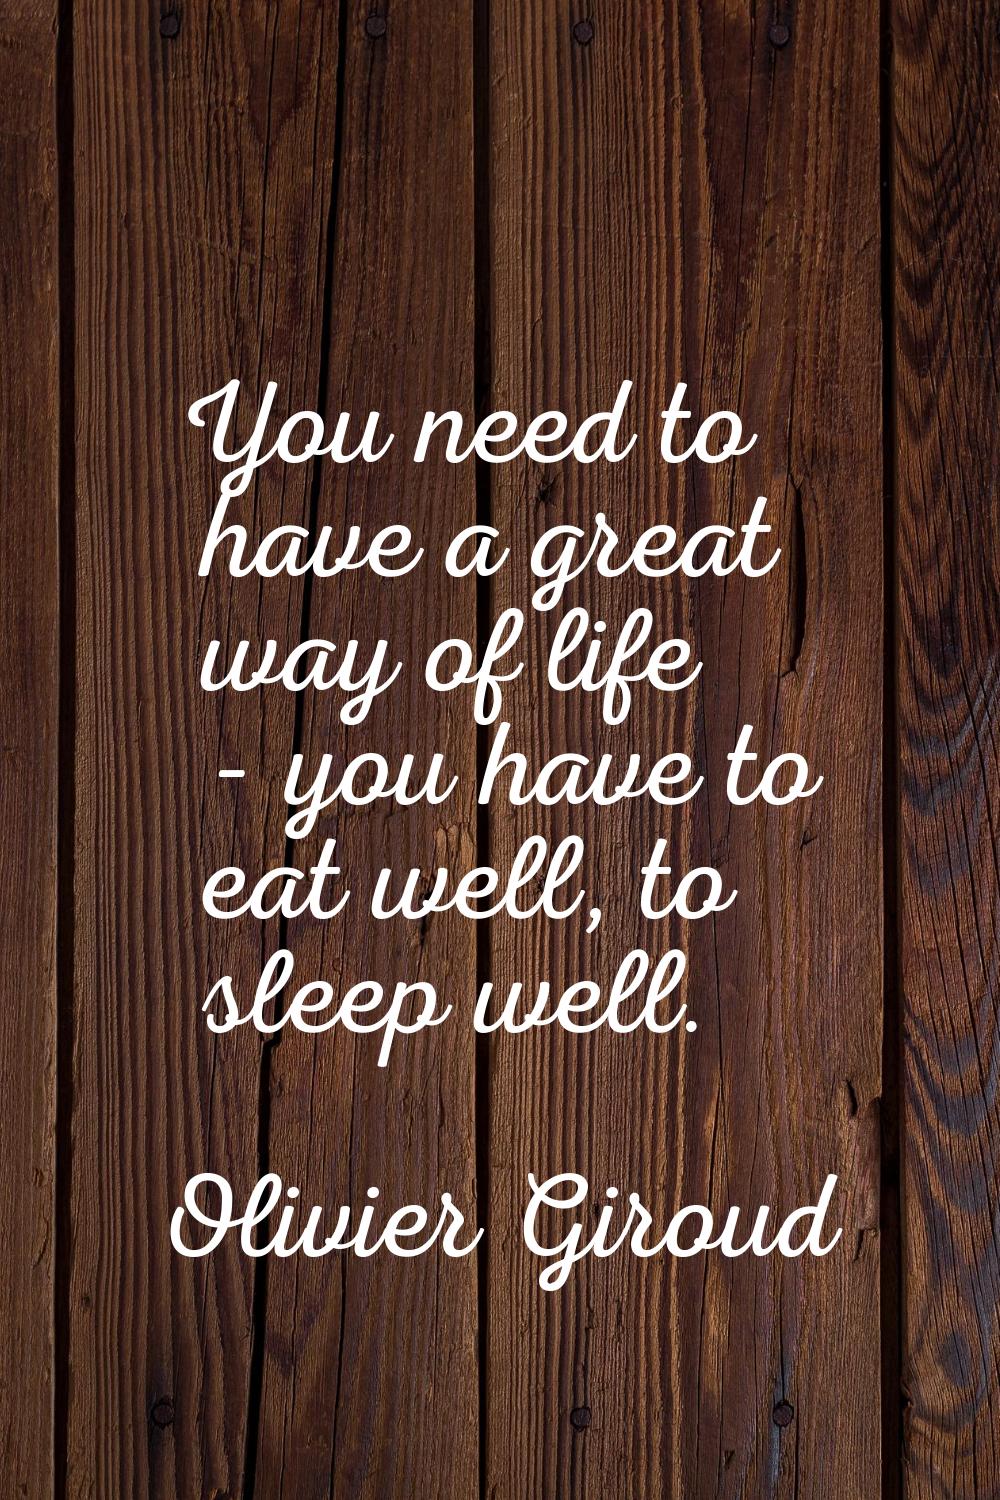 You need to have a great way of life - you have to eat well, to sleep well.